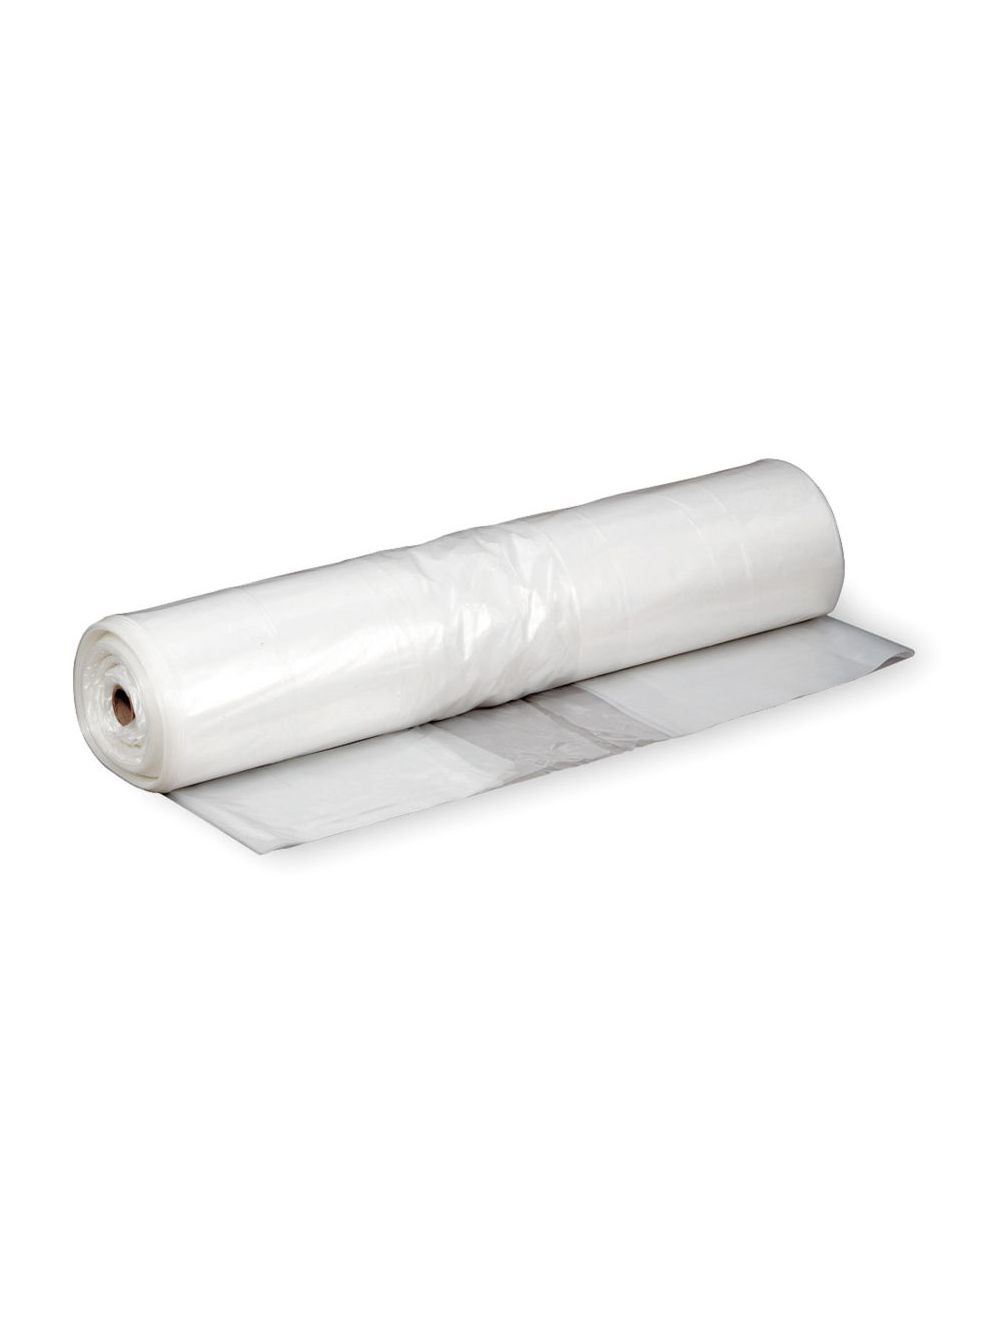 Plastic Sheeting 6 Mil Clear, 20 ft x 100 ft Roll